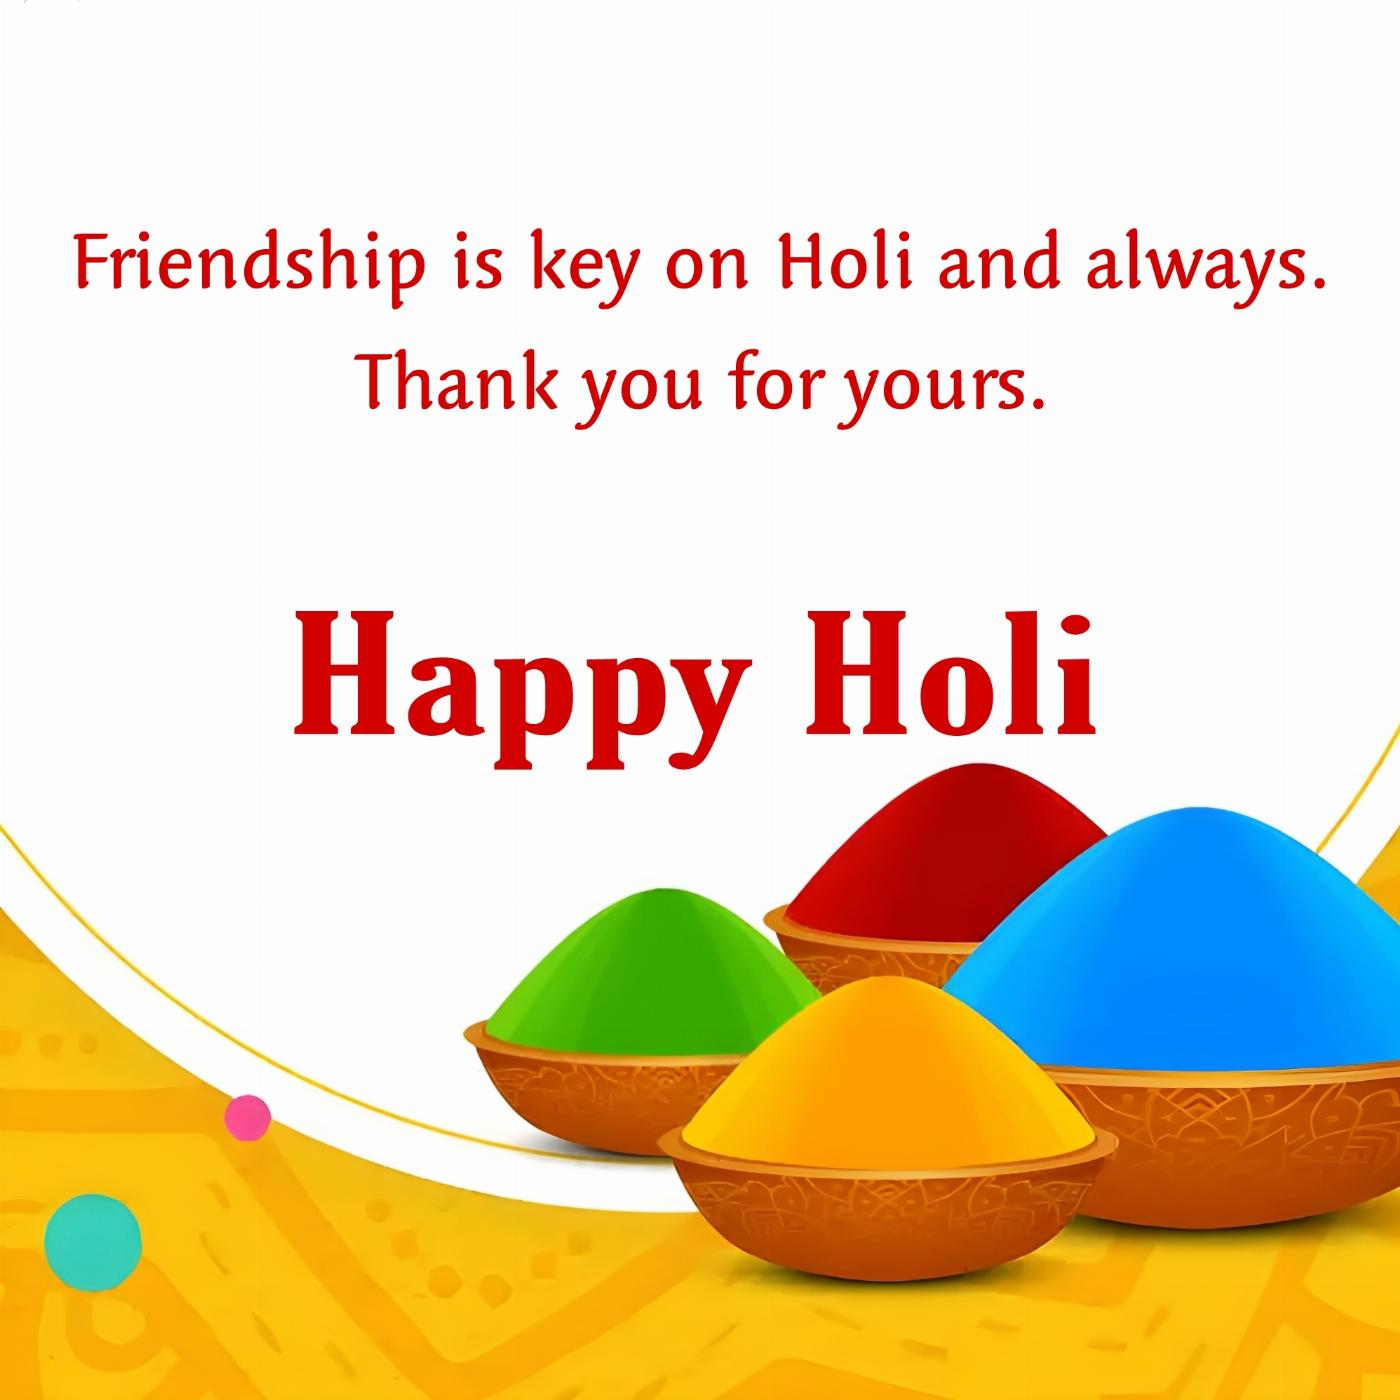 Friendship is key on Holi and always Thank you for yours